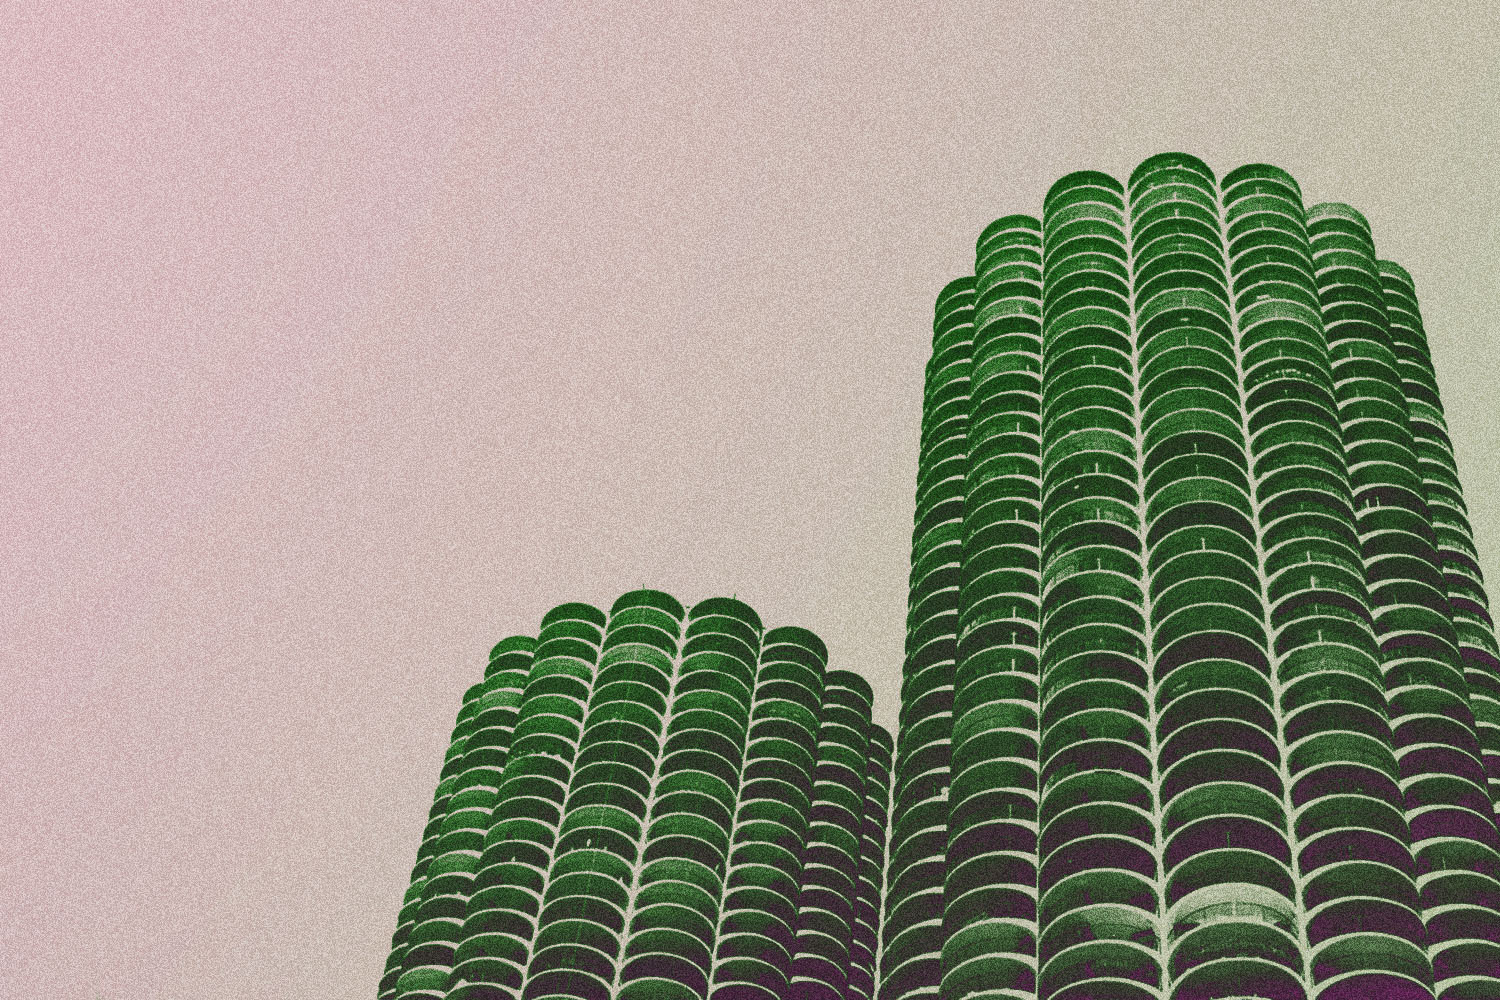 The Marina Towers as seen on Wilco's Yankee Hotel Foxtrot album